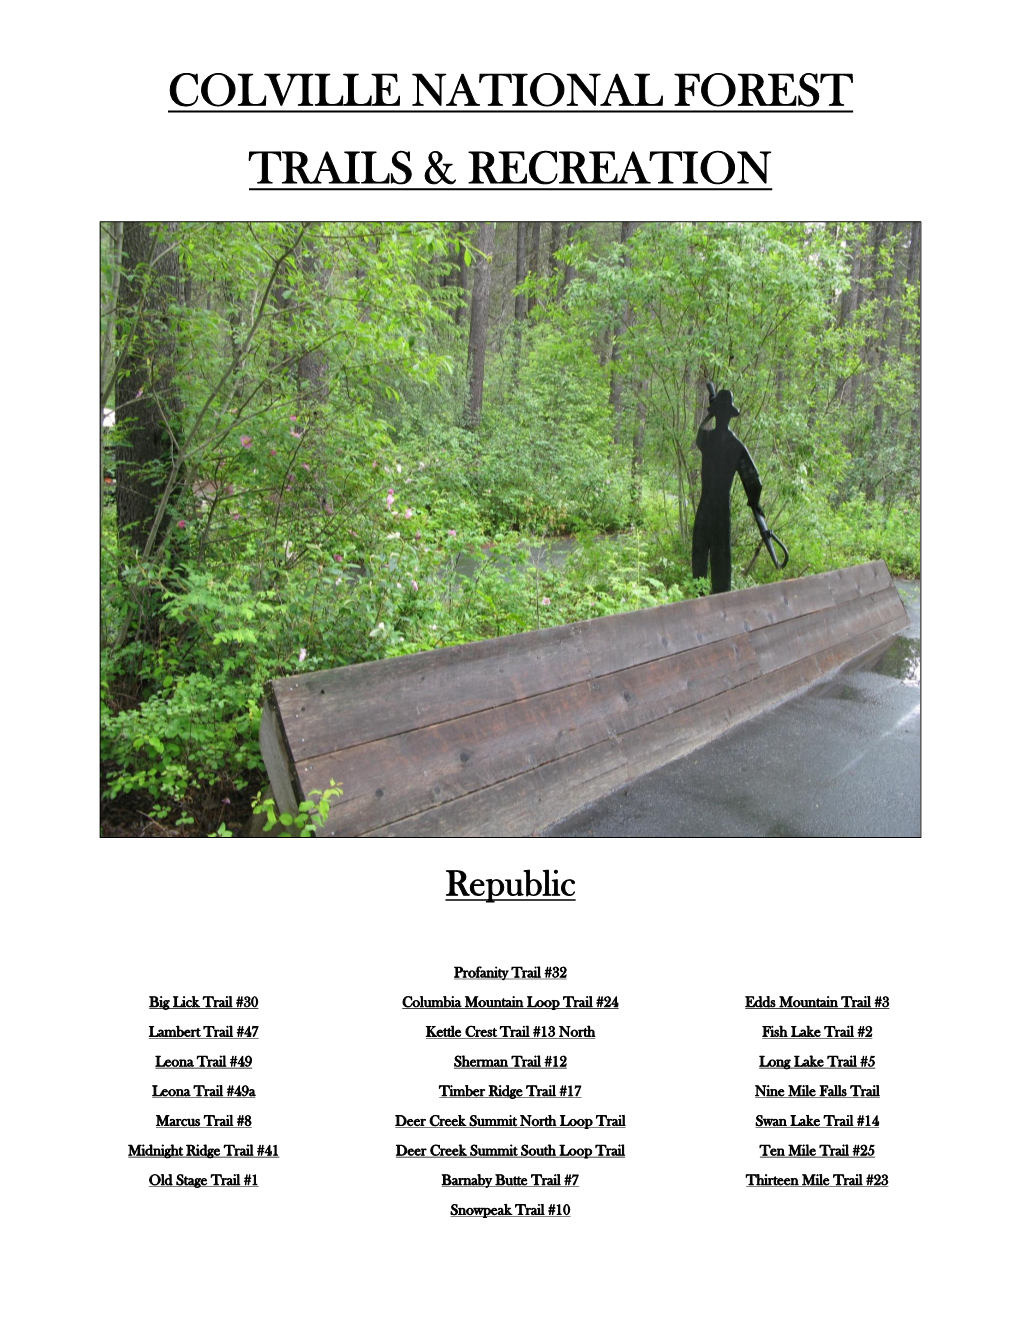 Colville National Forest Trails & Recreation